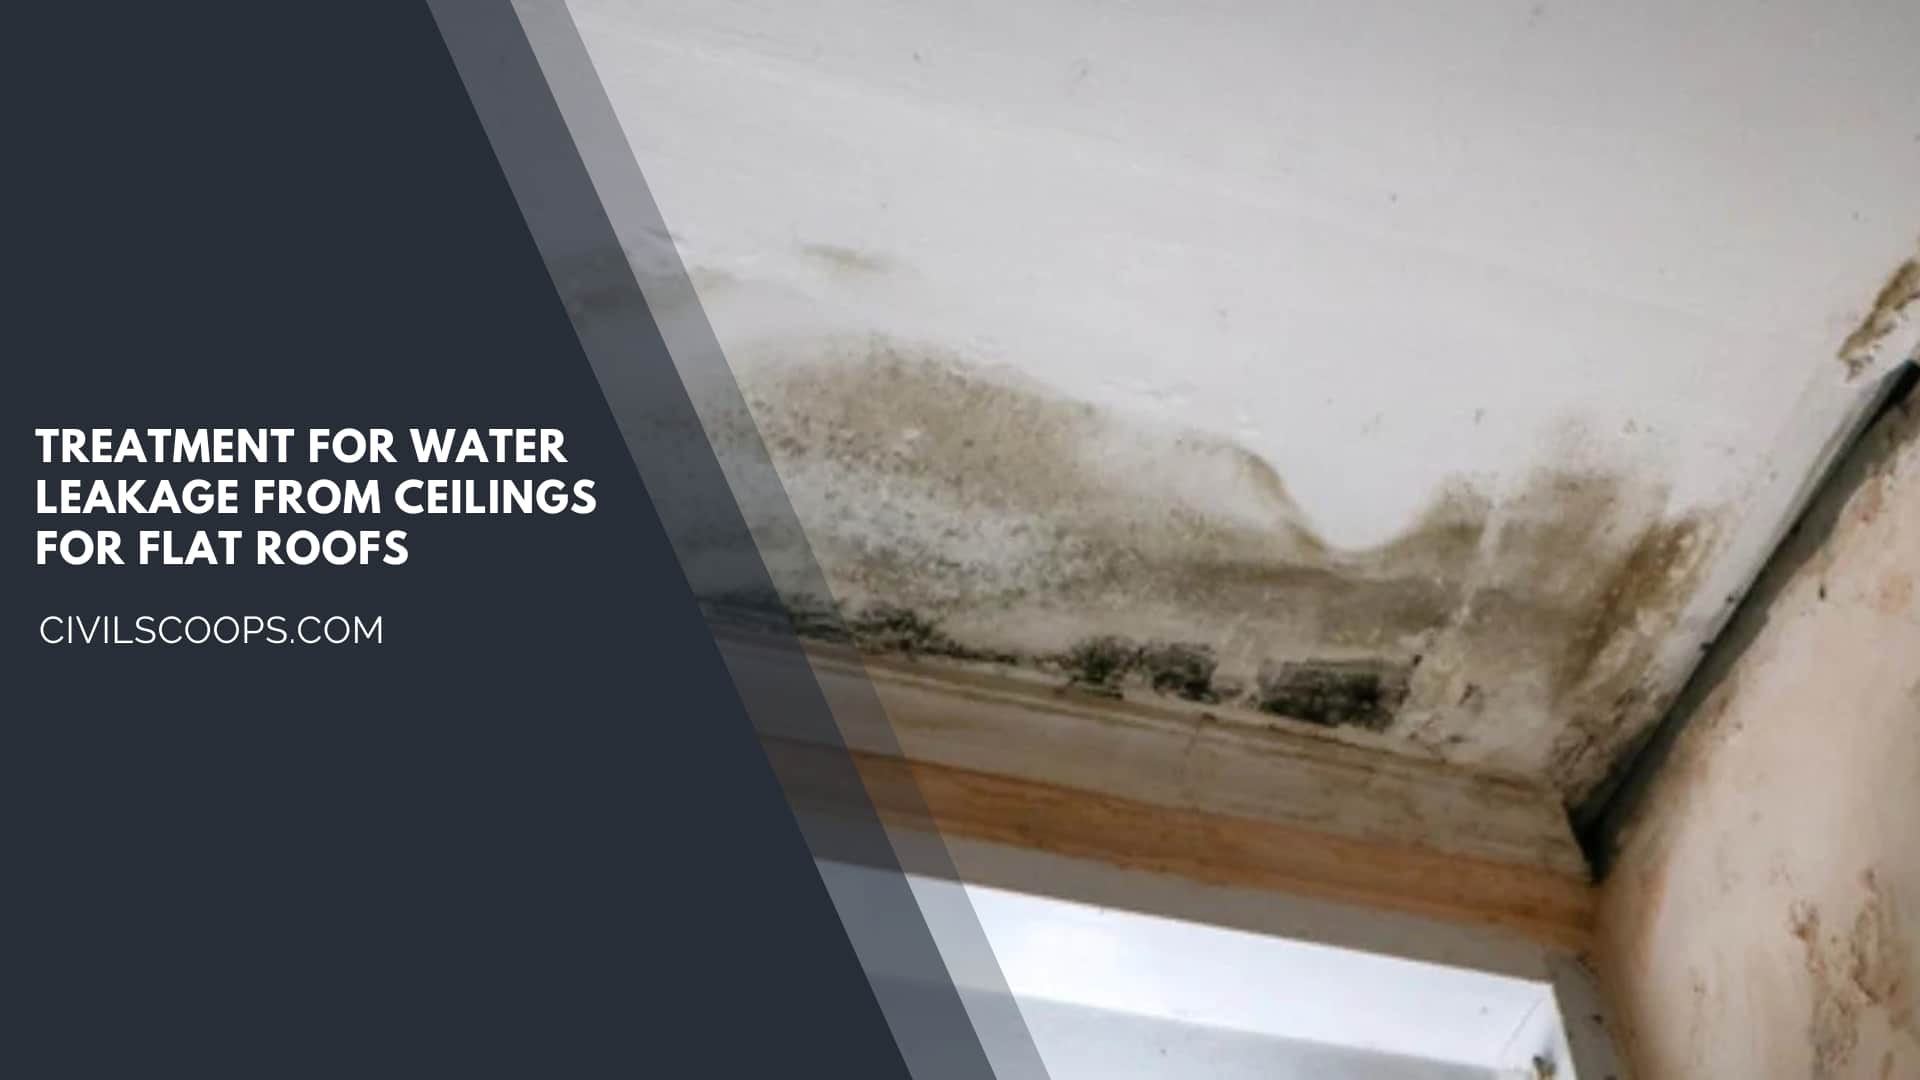 Treatment for Water Leakage from Ceilings for Flat Roofs